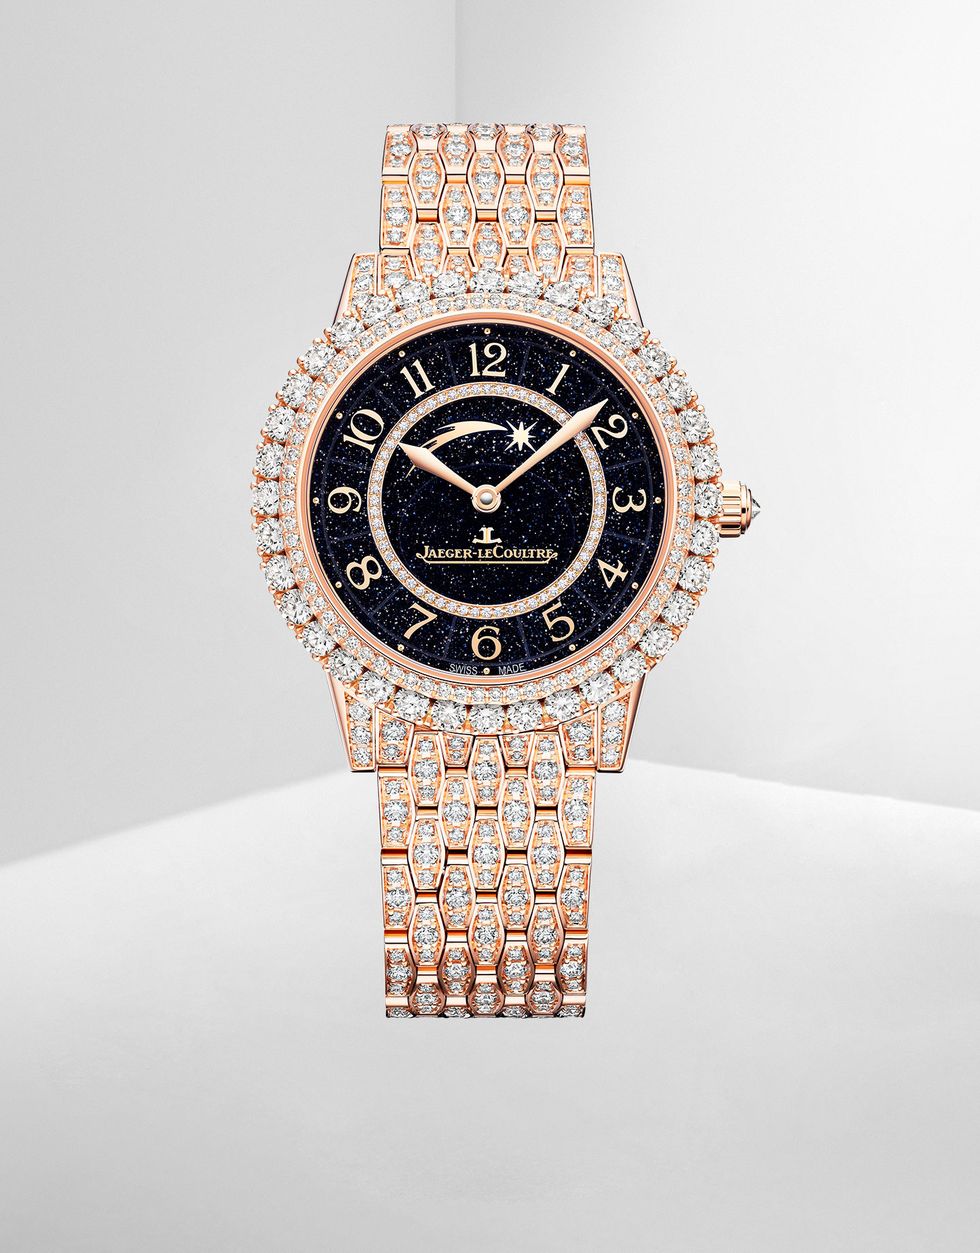 diamond and gold wrist watch with a black face